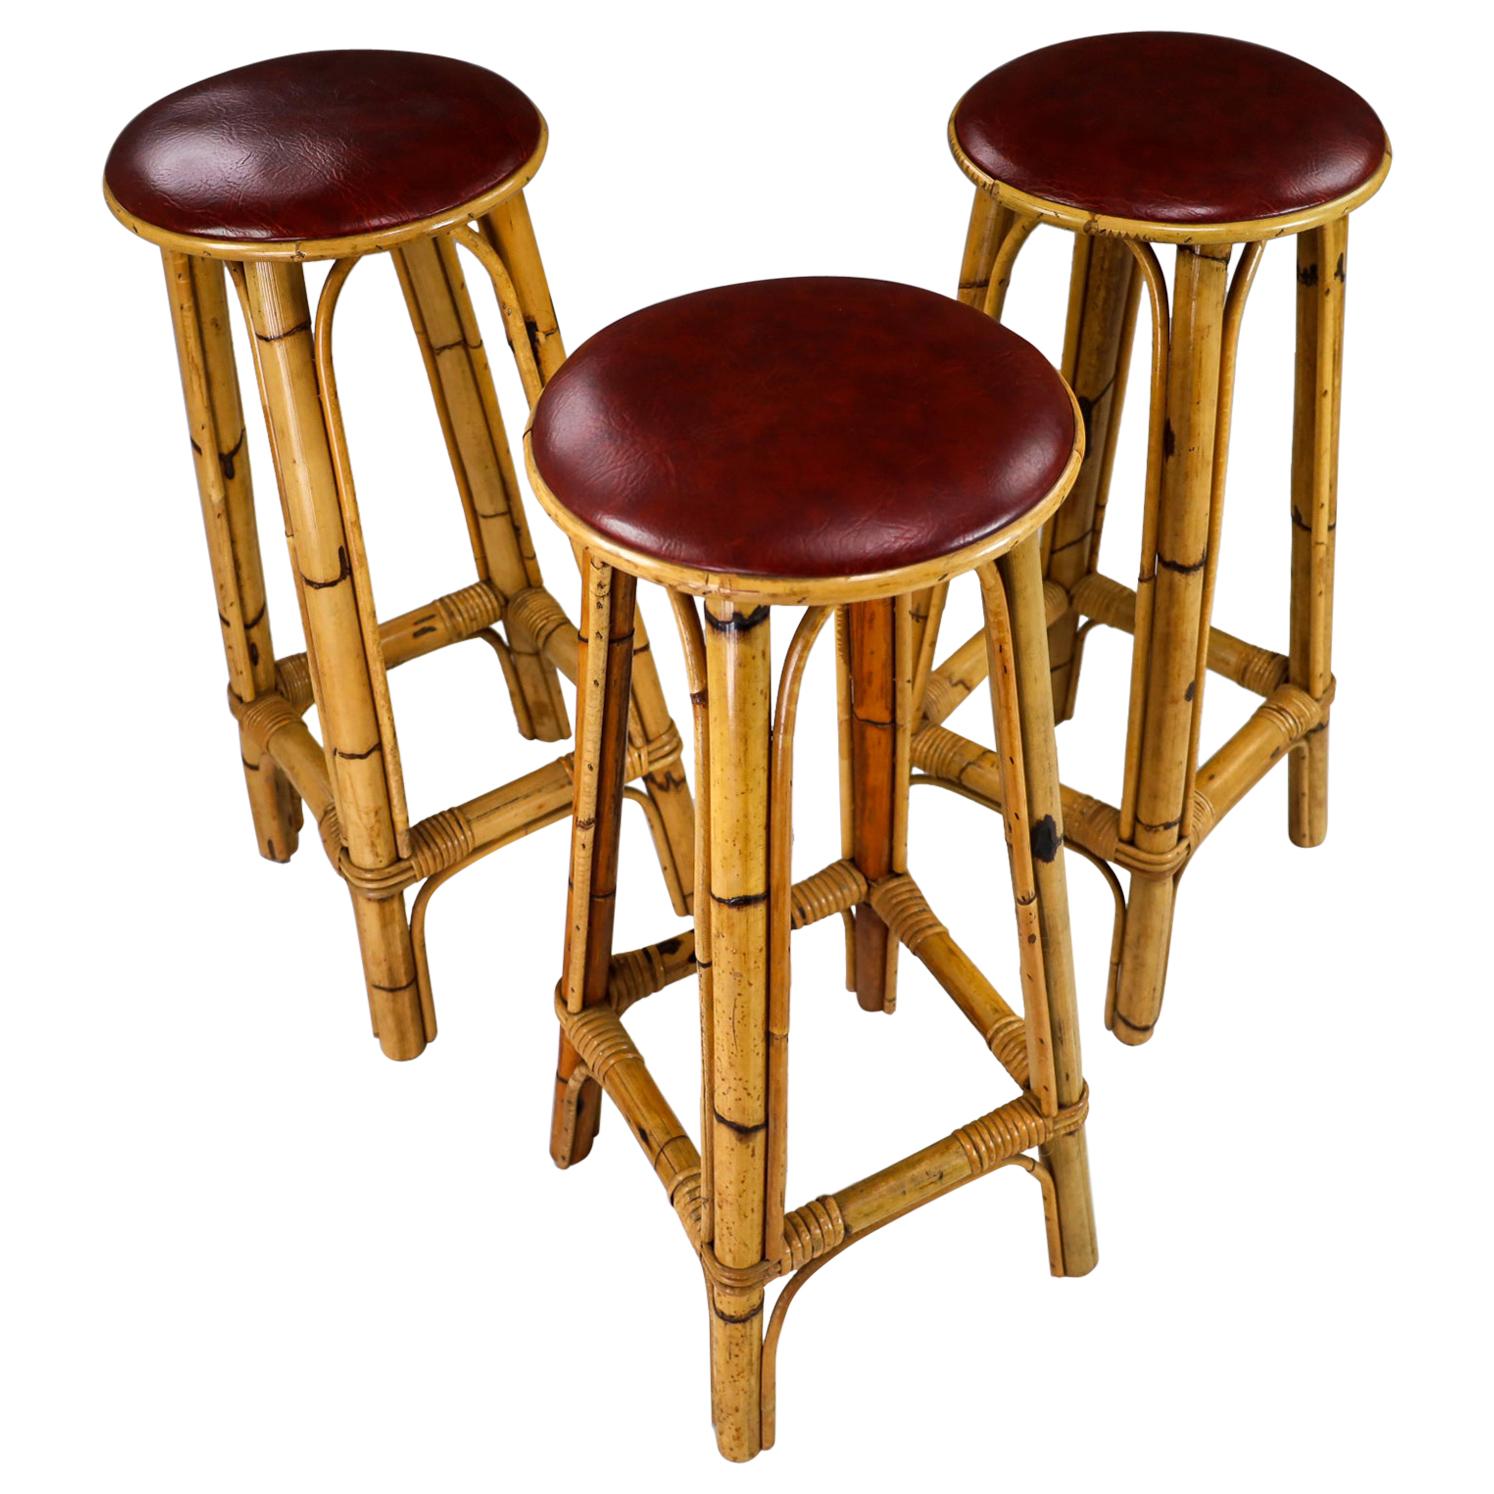 Set of Three Vintage Bamboo Barstools with Red Leather Seat, France, 1950s